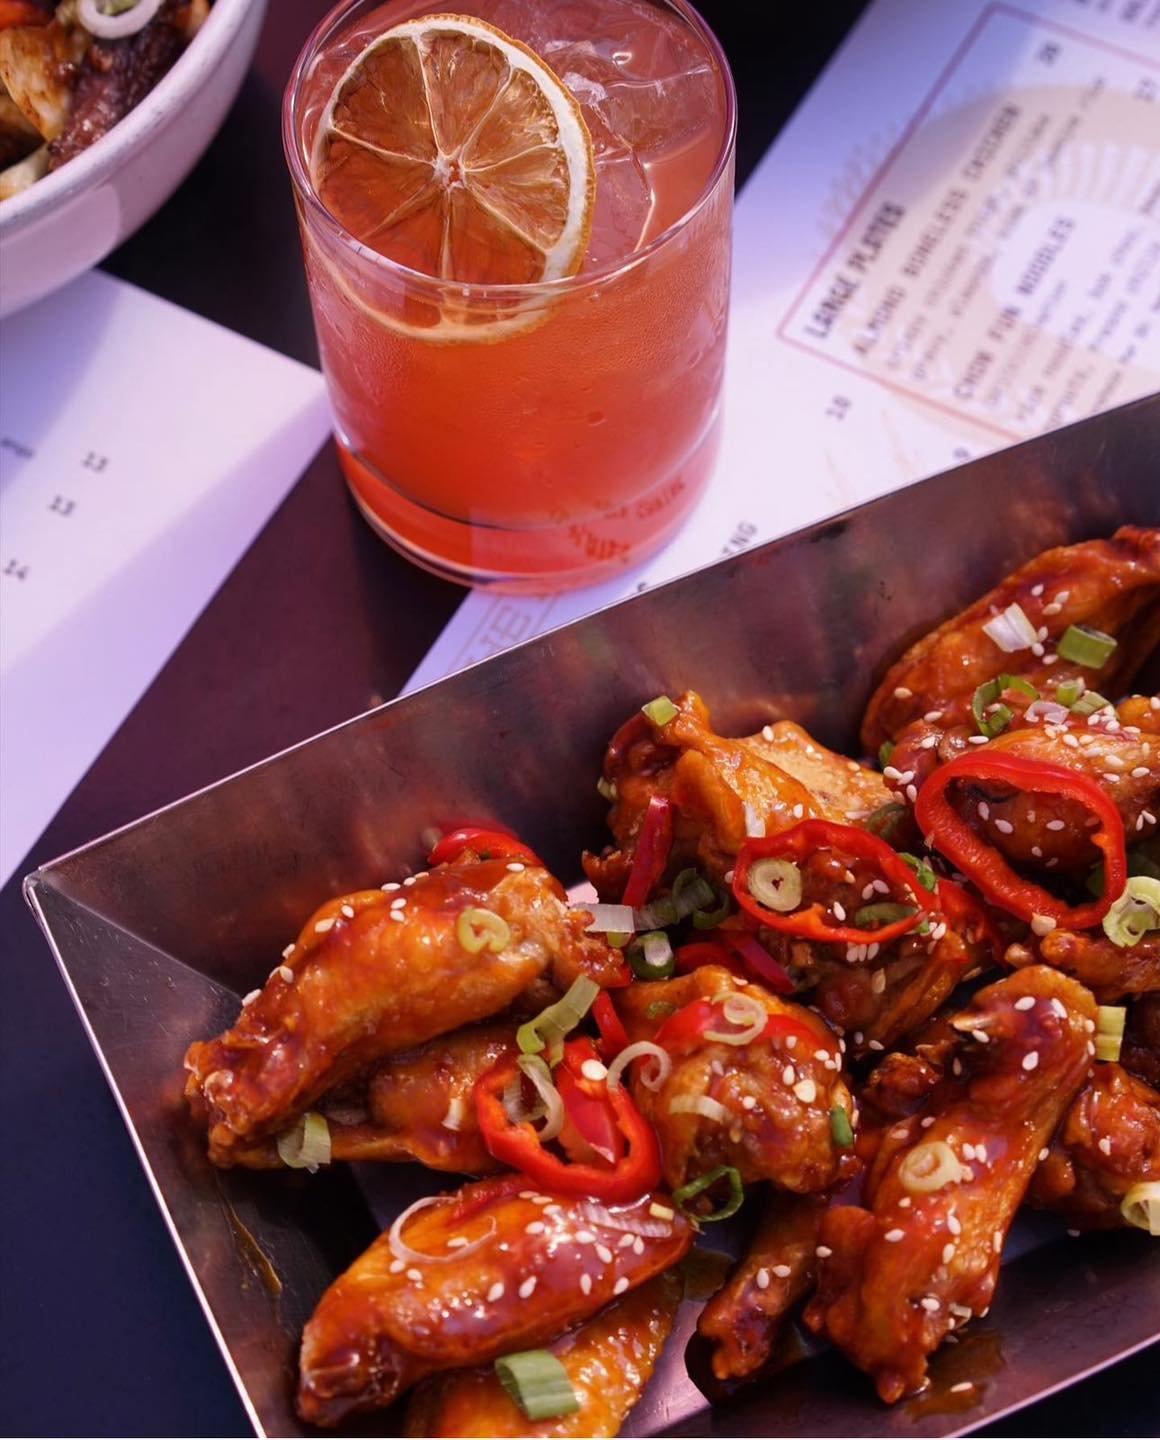 🔥Crispy chicken wings, tossed in honey sesame sauce with pickled chilies and scallions, are calling your name!

#ThePeterboro #Detroit #Cheers